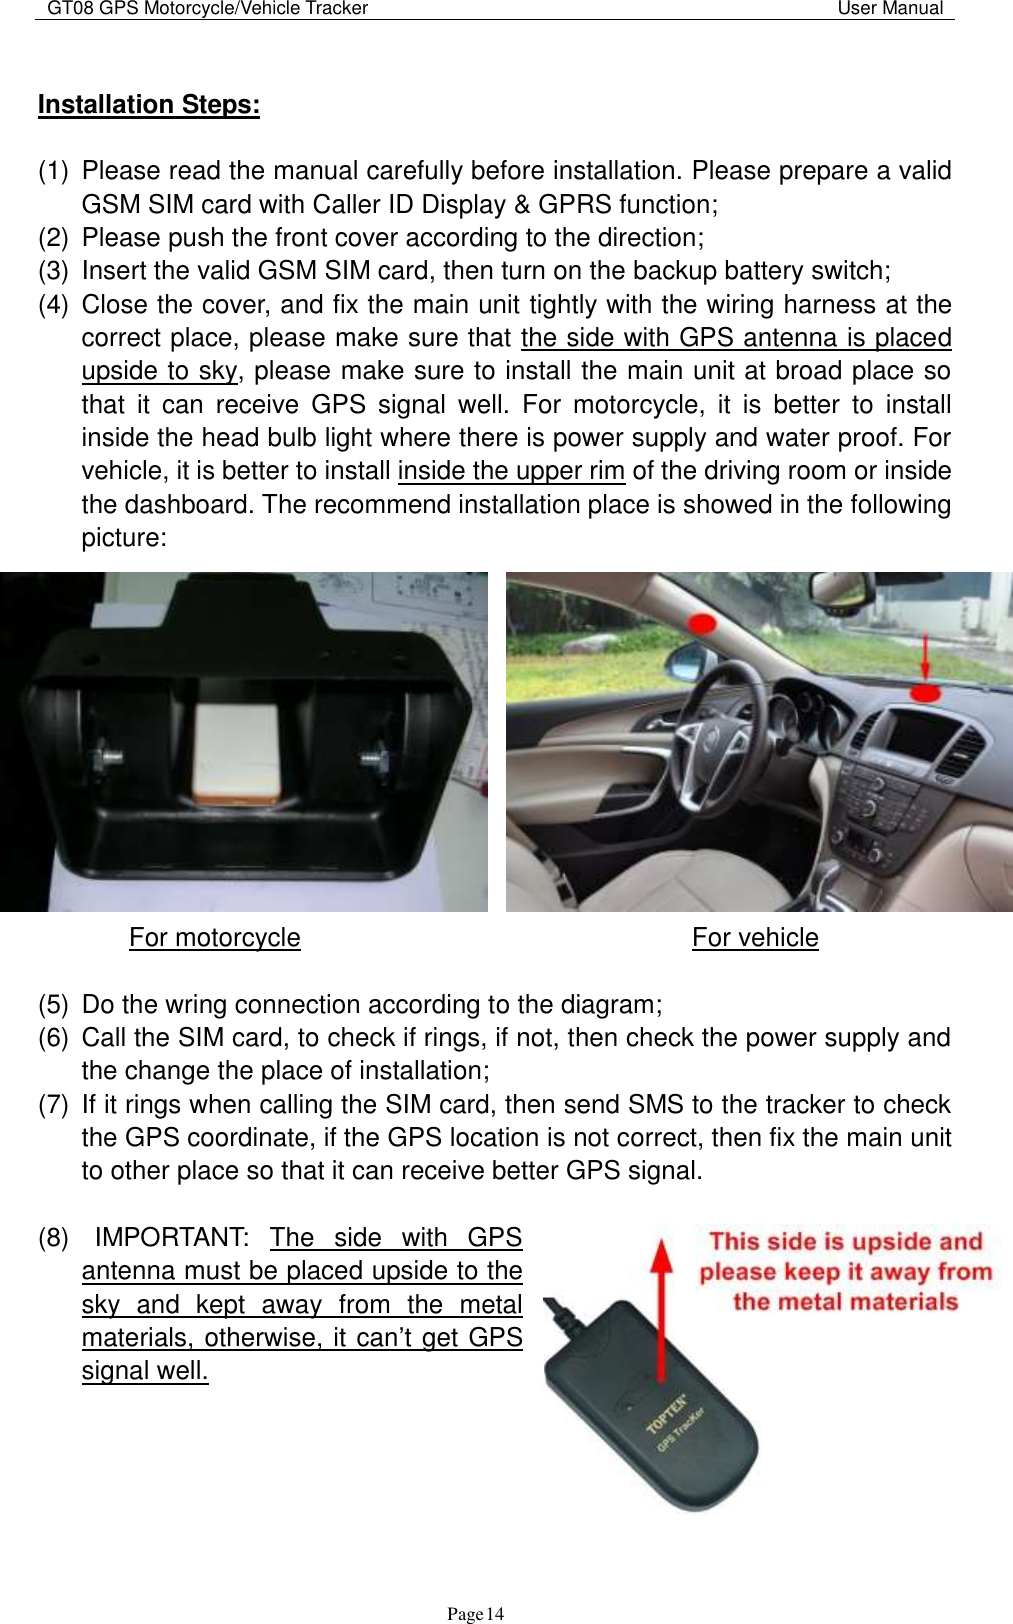 GT08 GPS Motorcycle/Vehicle Tracker                                                                                           User Manual                                     Page   14  Installation Steps:  (1)  Please read the manual carefully before installation. Please prepare a valid GSM SIM card with Caller ID Display &amp; GPRS function; (2)  Please push the front cover according to the direction; (3)  Insert the valid GSM SIM card, then turn on the backup battery switch; (4)  Close the cover, and fix the main unit tightly with the wiring harness at the correct place, please make sure that the side with GPS antenna is placed upside to sky, please make sure to install the main unit at broad place so that  it  can  receive  GPS  signal  well.  For  motorcycle,  it  is  better  to  install inside the head bulb light where there is power supply and water proof. For vehicle, it is better to install inside the upper rim of the driving room or inside the dashboard. The recommend installation place is showed in the following picture:                   For motorcycle                              For vehicle     (5)  Do the wring connection according to the diagram; (6)  Call the SIM card, to check if rings, if not, then check the power supply and the change the place of installation; (7)  If it rings when calling the SIM card, then send SMS to the tracker to check the GPS coordinate, if the GPS location is not correct, then fix the main unit to other place so that it can receive better GPS signal.    (8)    IMPORTANT:  The  side  with  GPS antenna must be placed upside to the sky  and  kept  away  from  the  metal materials, otherwise, it can‟t get GPS signal well.        